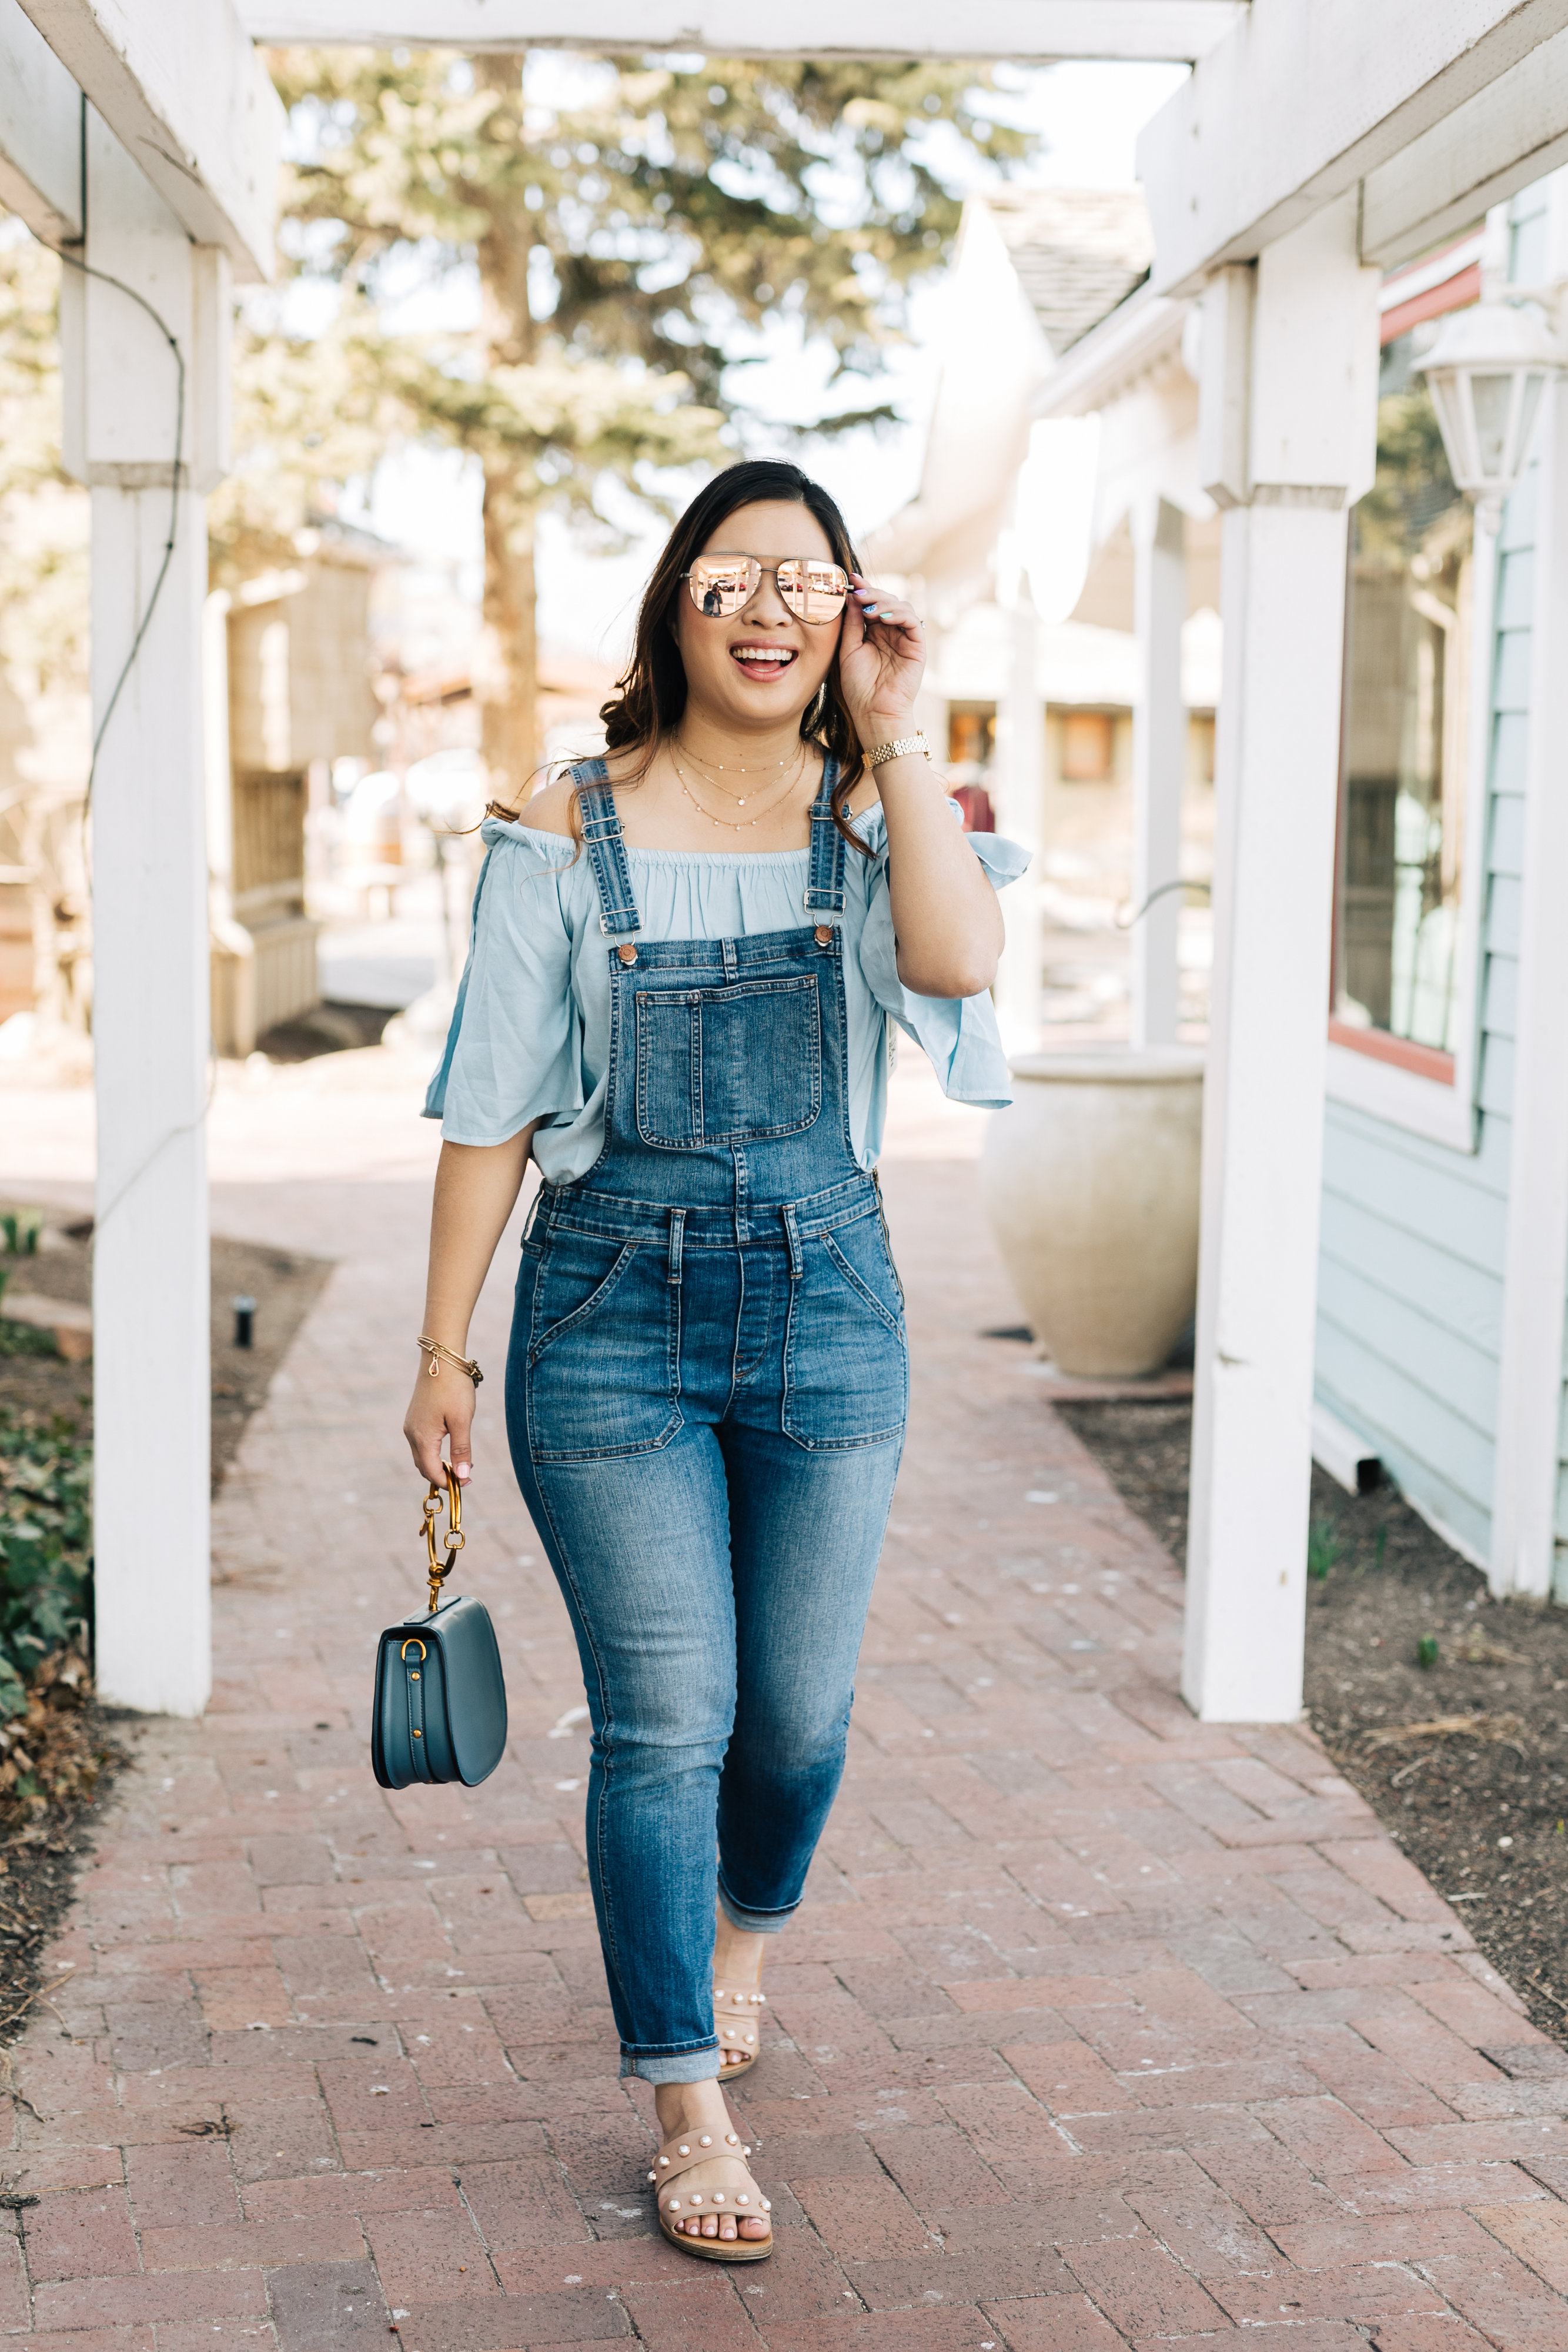 How To Style Denim Overalls | Spring Fashion | Sandy a la Mode